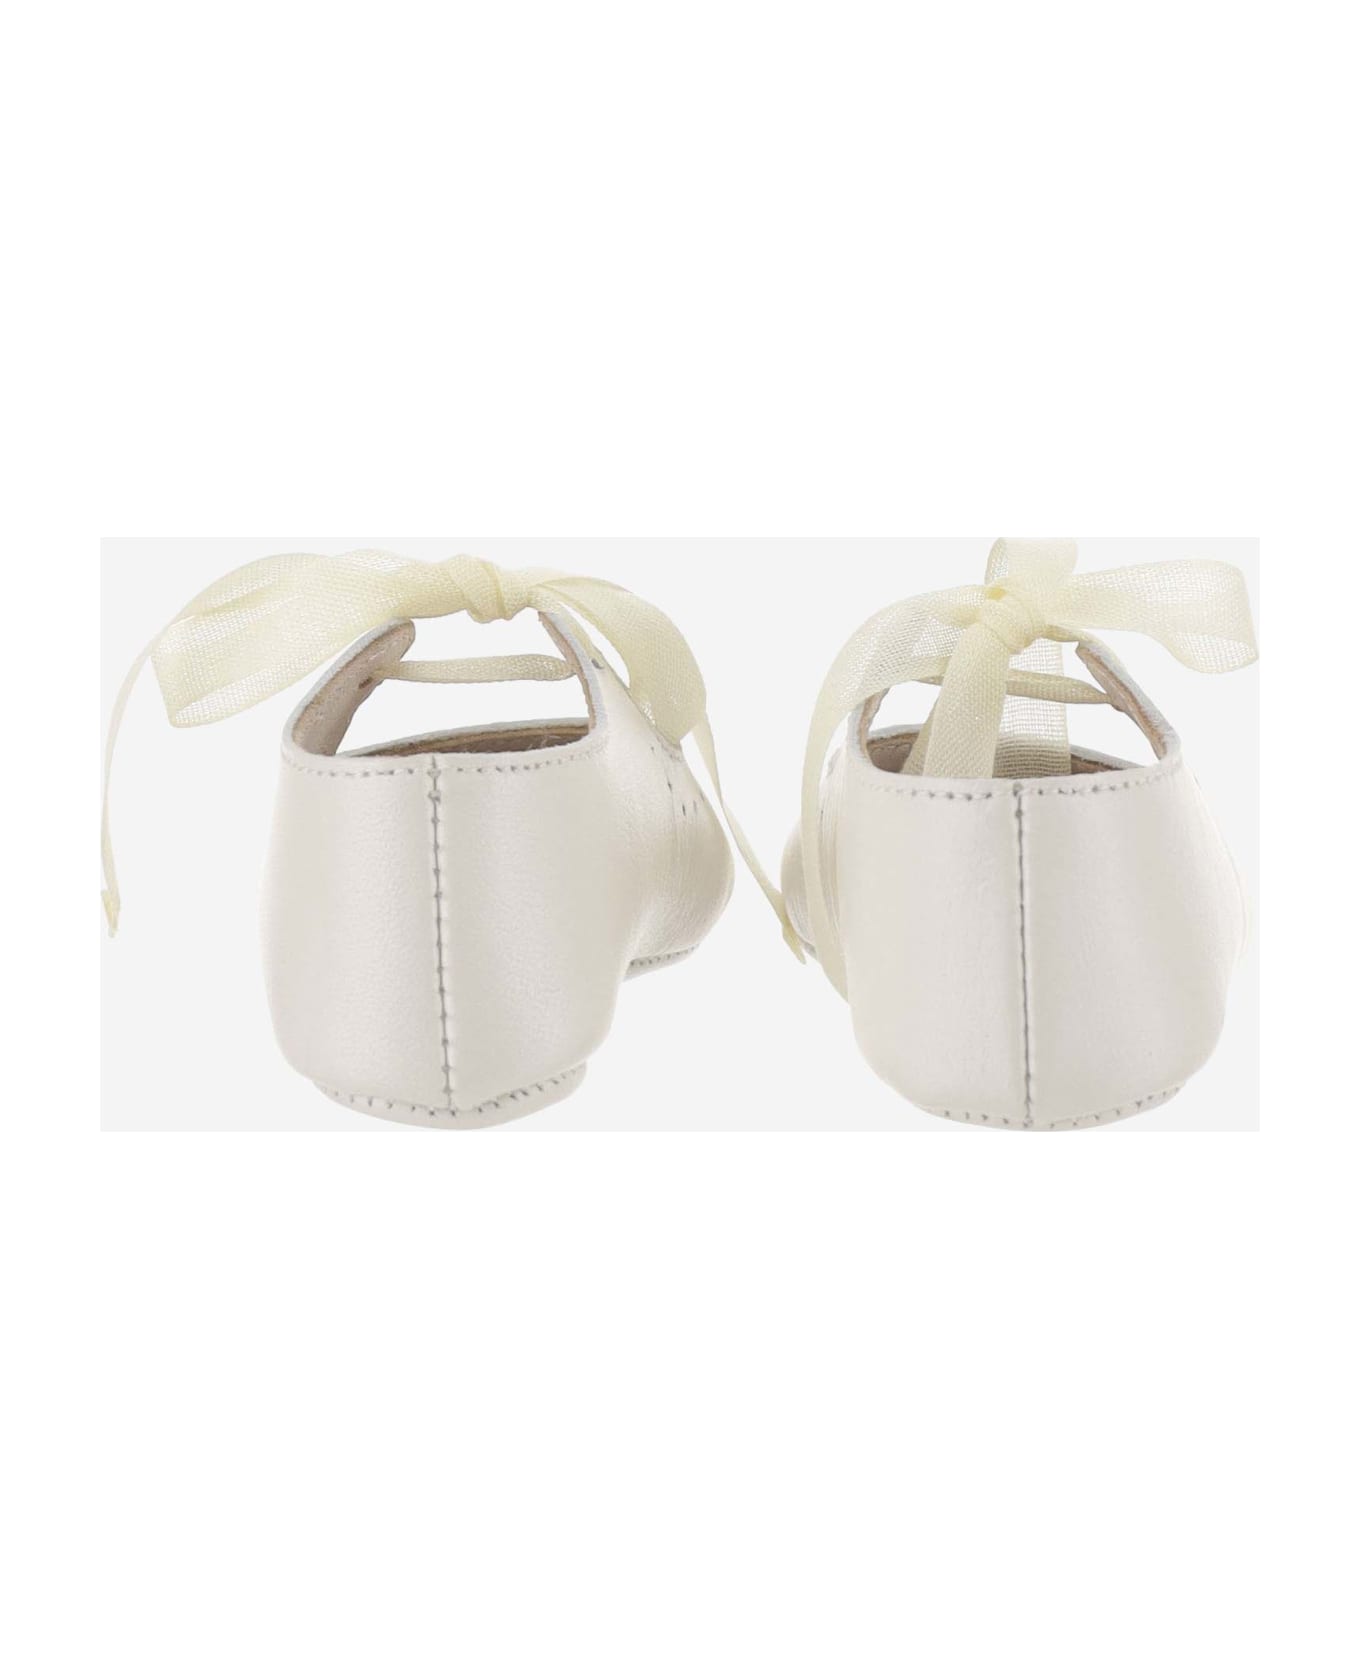 Bonpoint Nappa Leather Shoes With Bow - White